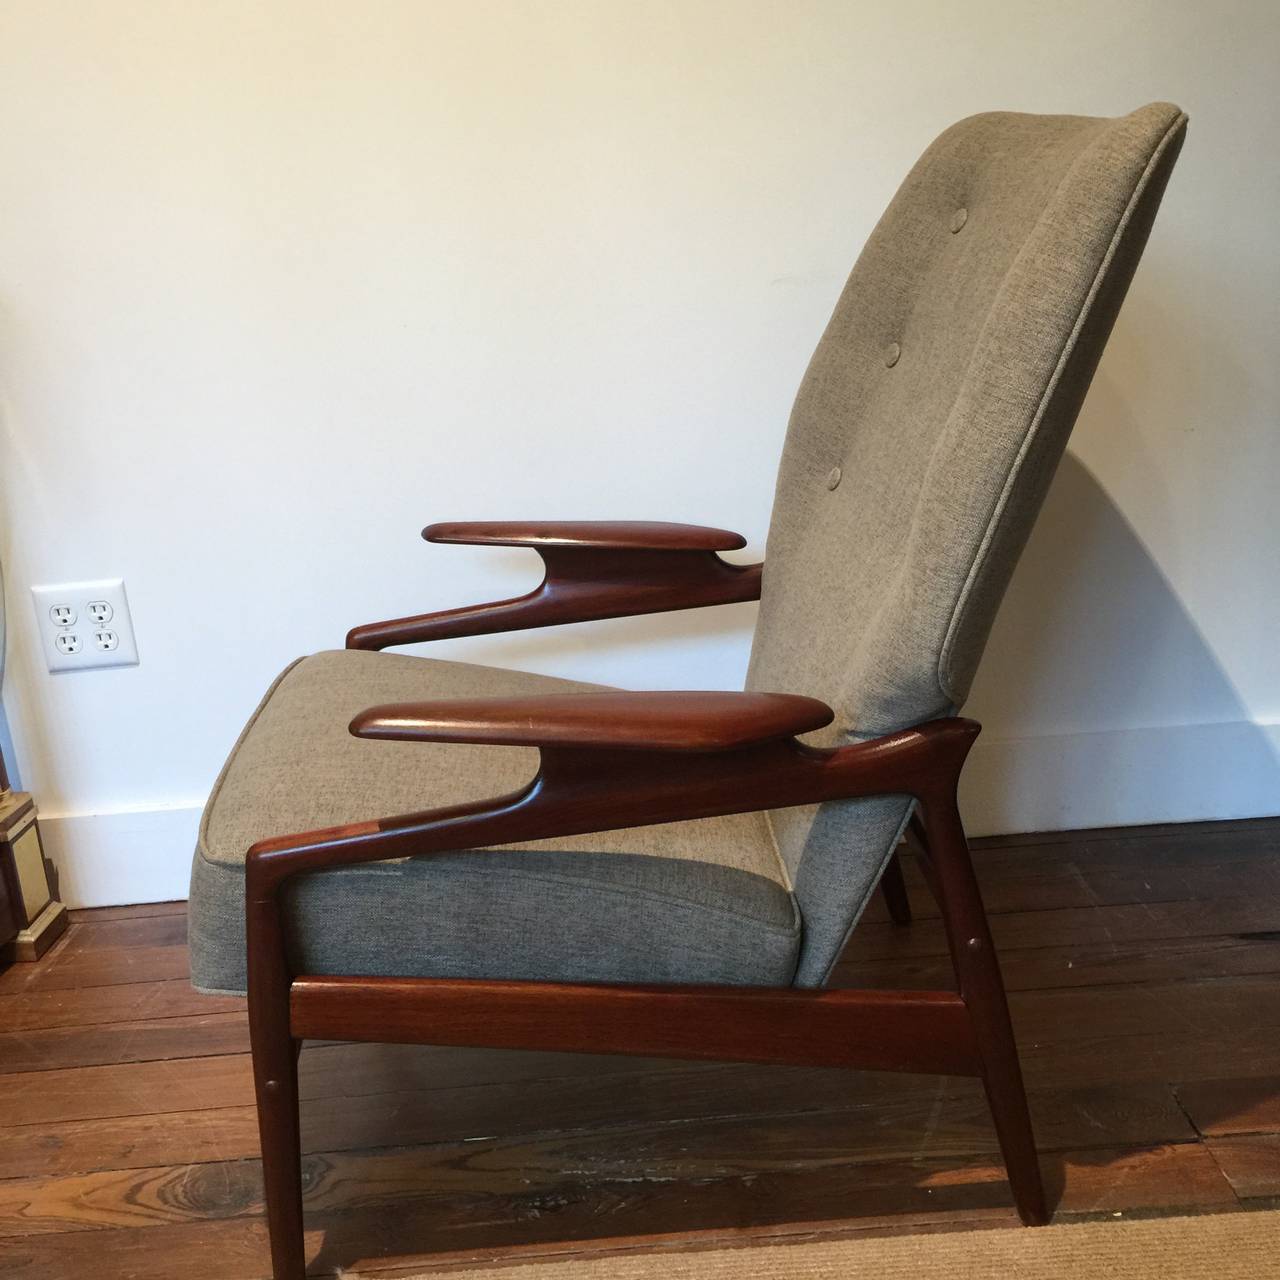 Finn Juhl style reclining lounge chair and ottoman. Has manually operated mechanism under seat. Chair has small brass inlays typical of Grete Jalk or Illum Wikellso construction. Recently upholstered. 
Ottoman measures 25